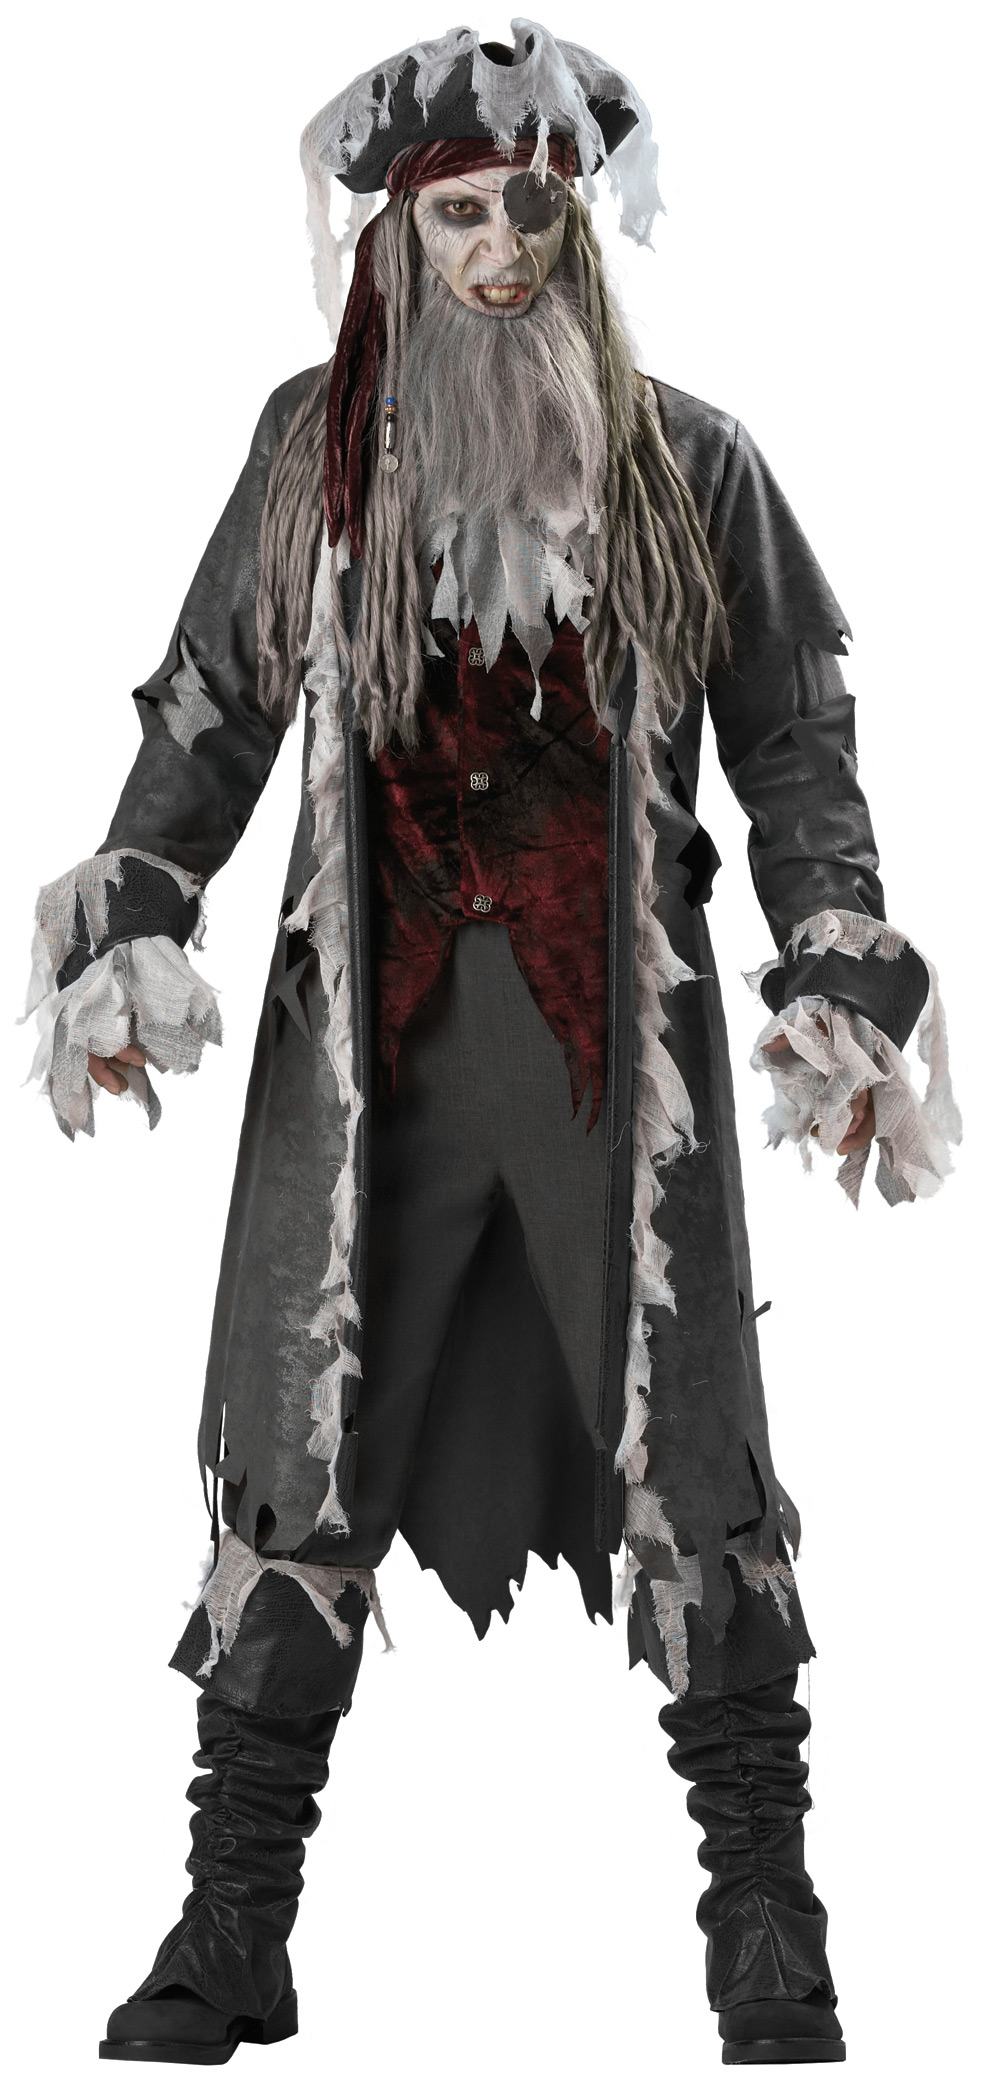 In Character Costumes Men's Pirate Ghost Elite Collection Adult Costume - Large